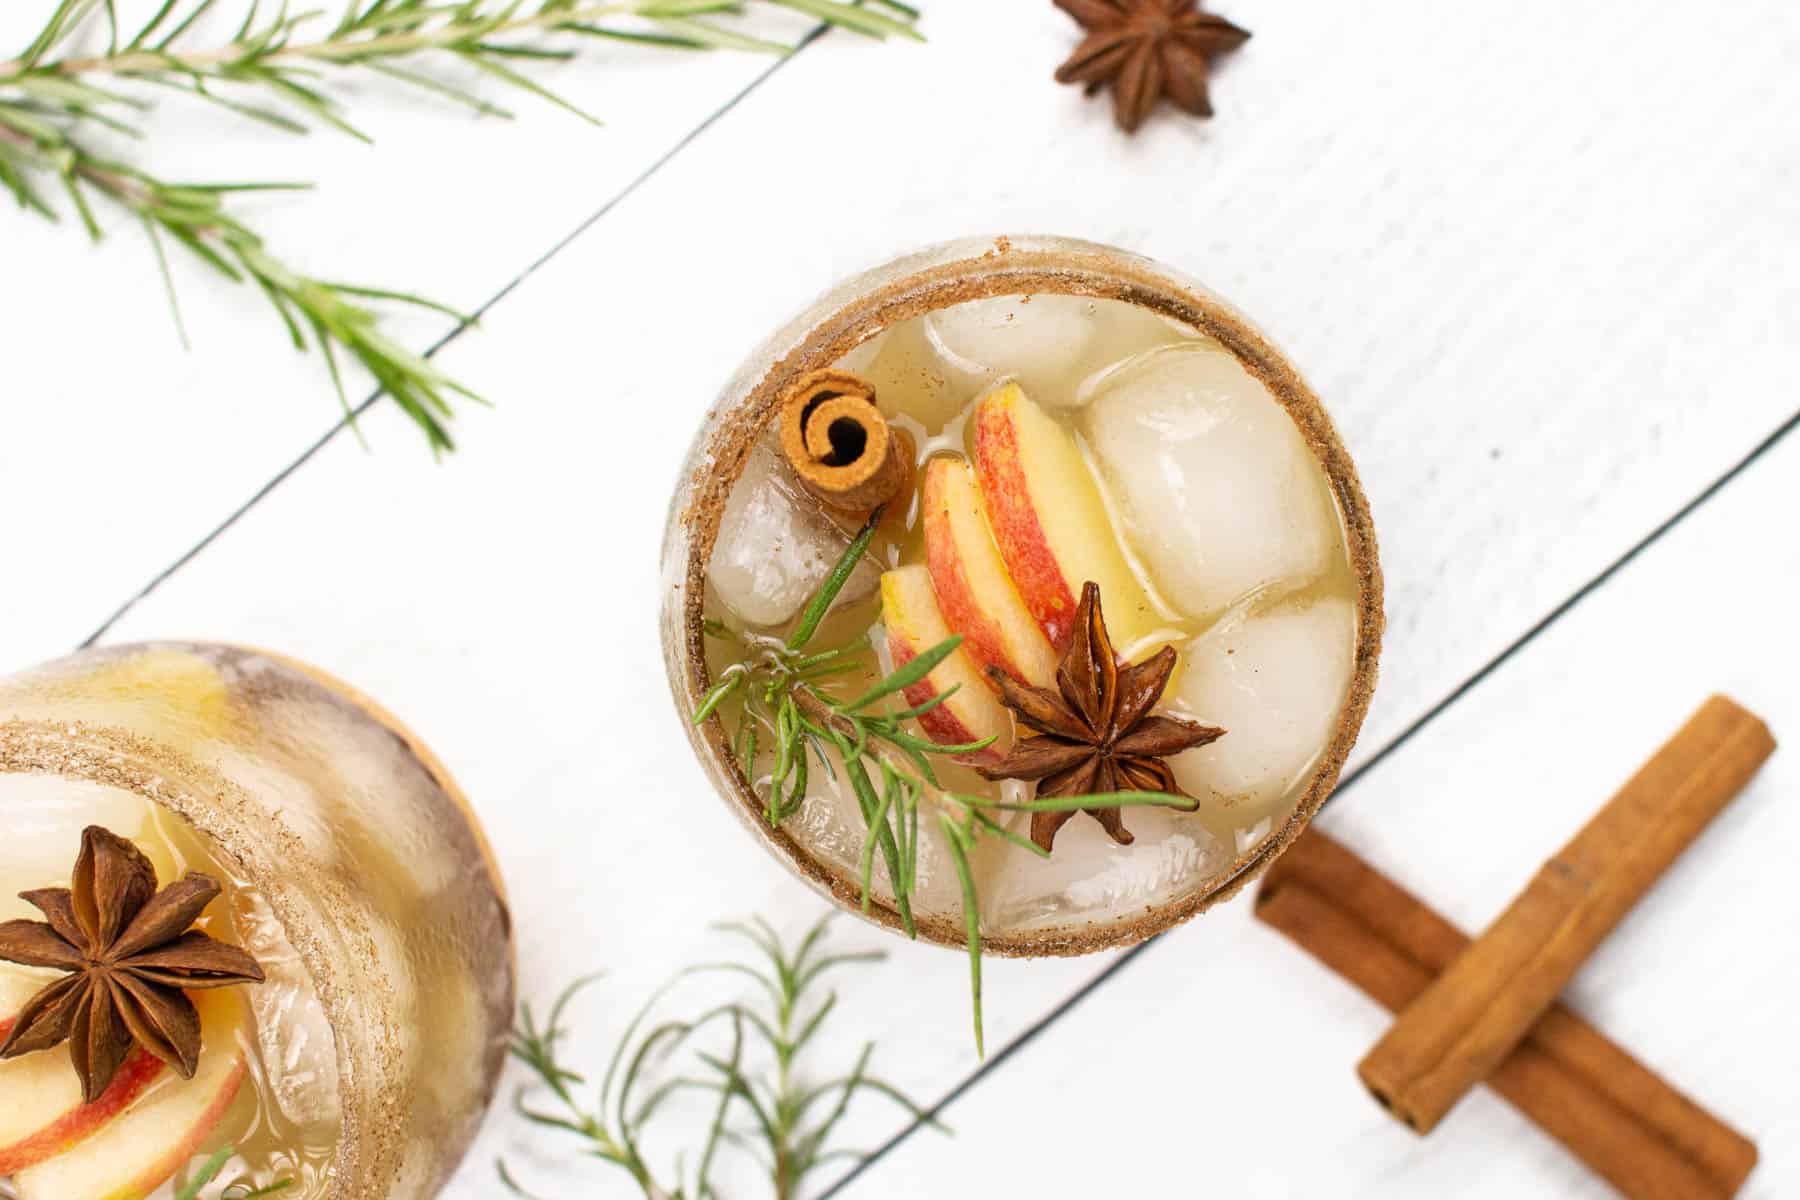 An inviting glass of apple cider sangria placed near rosemary and cinnamon sticks.